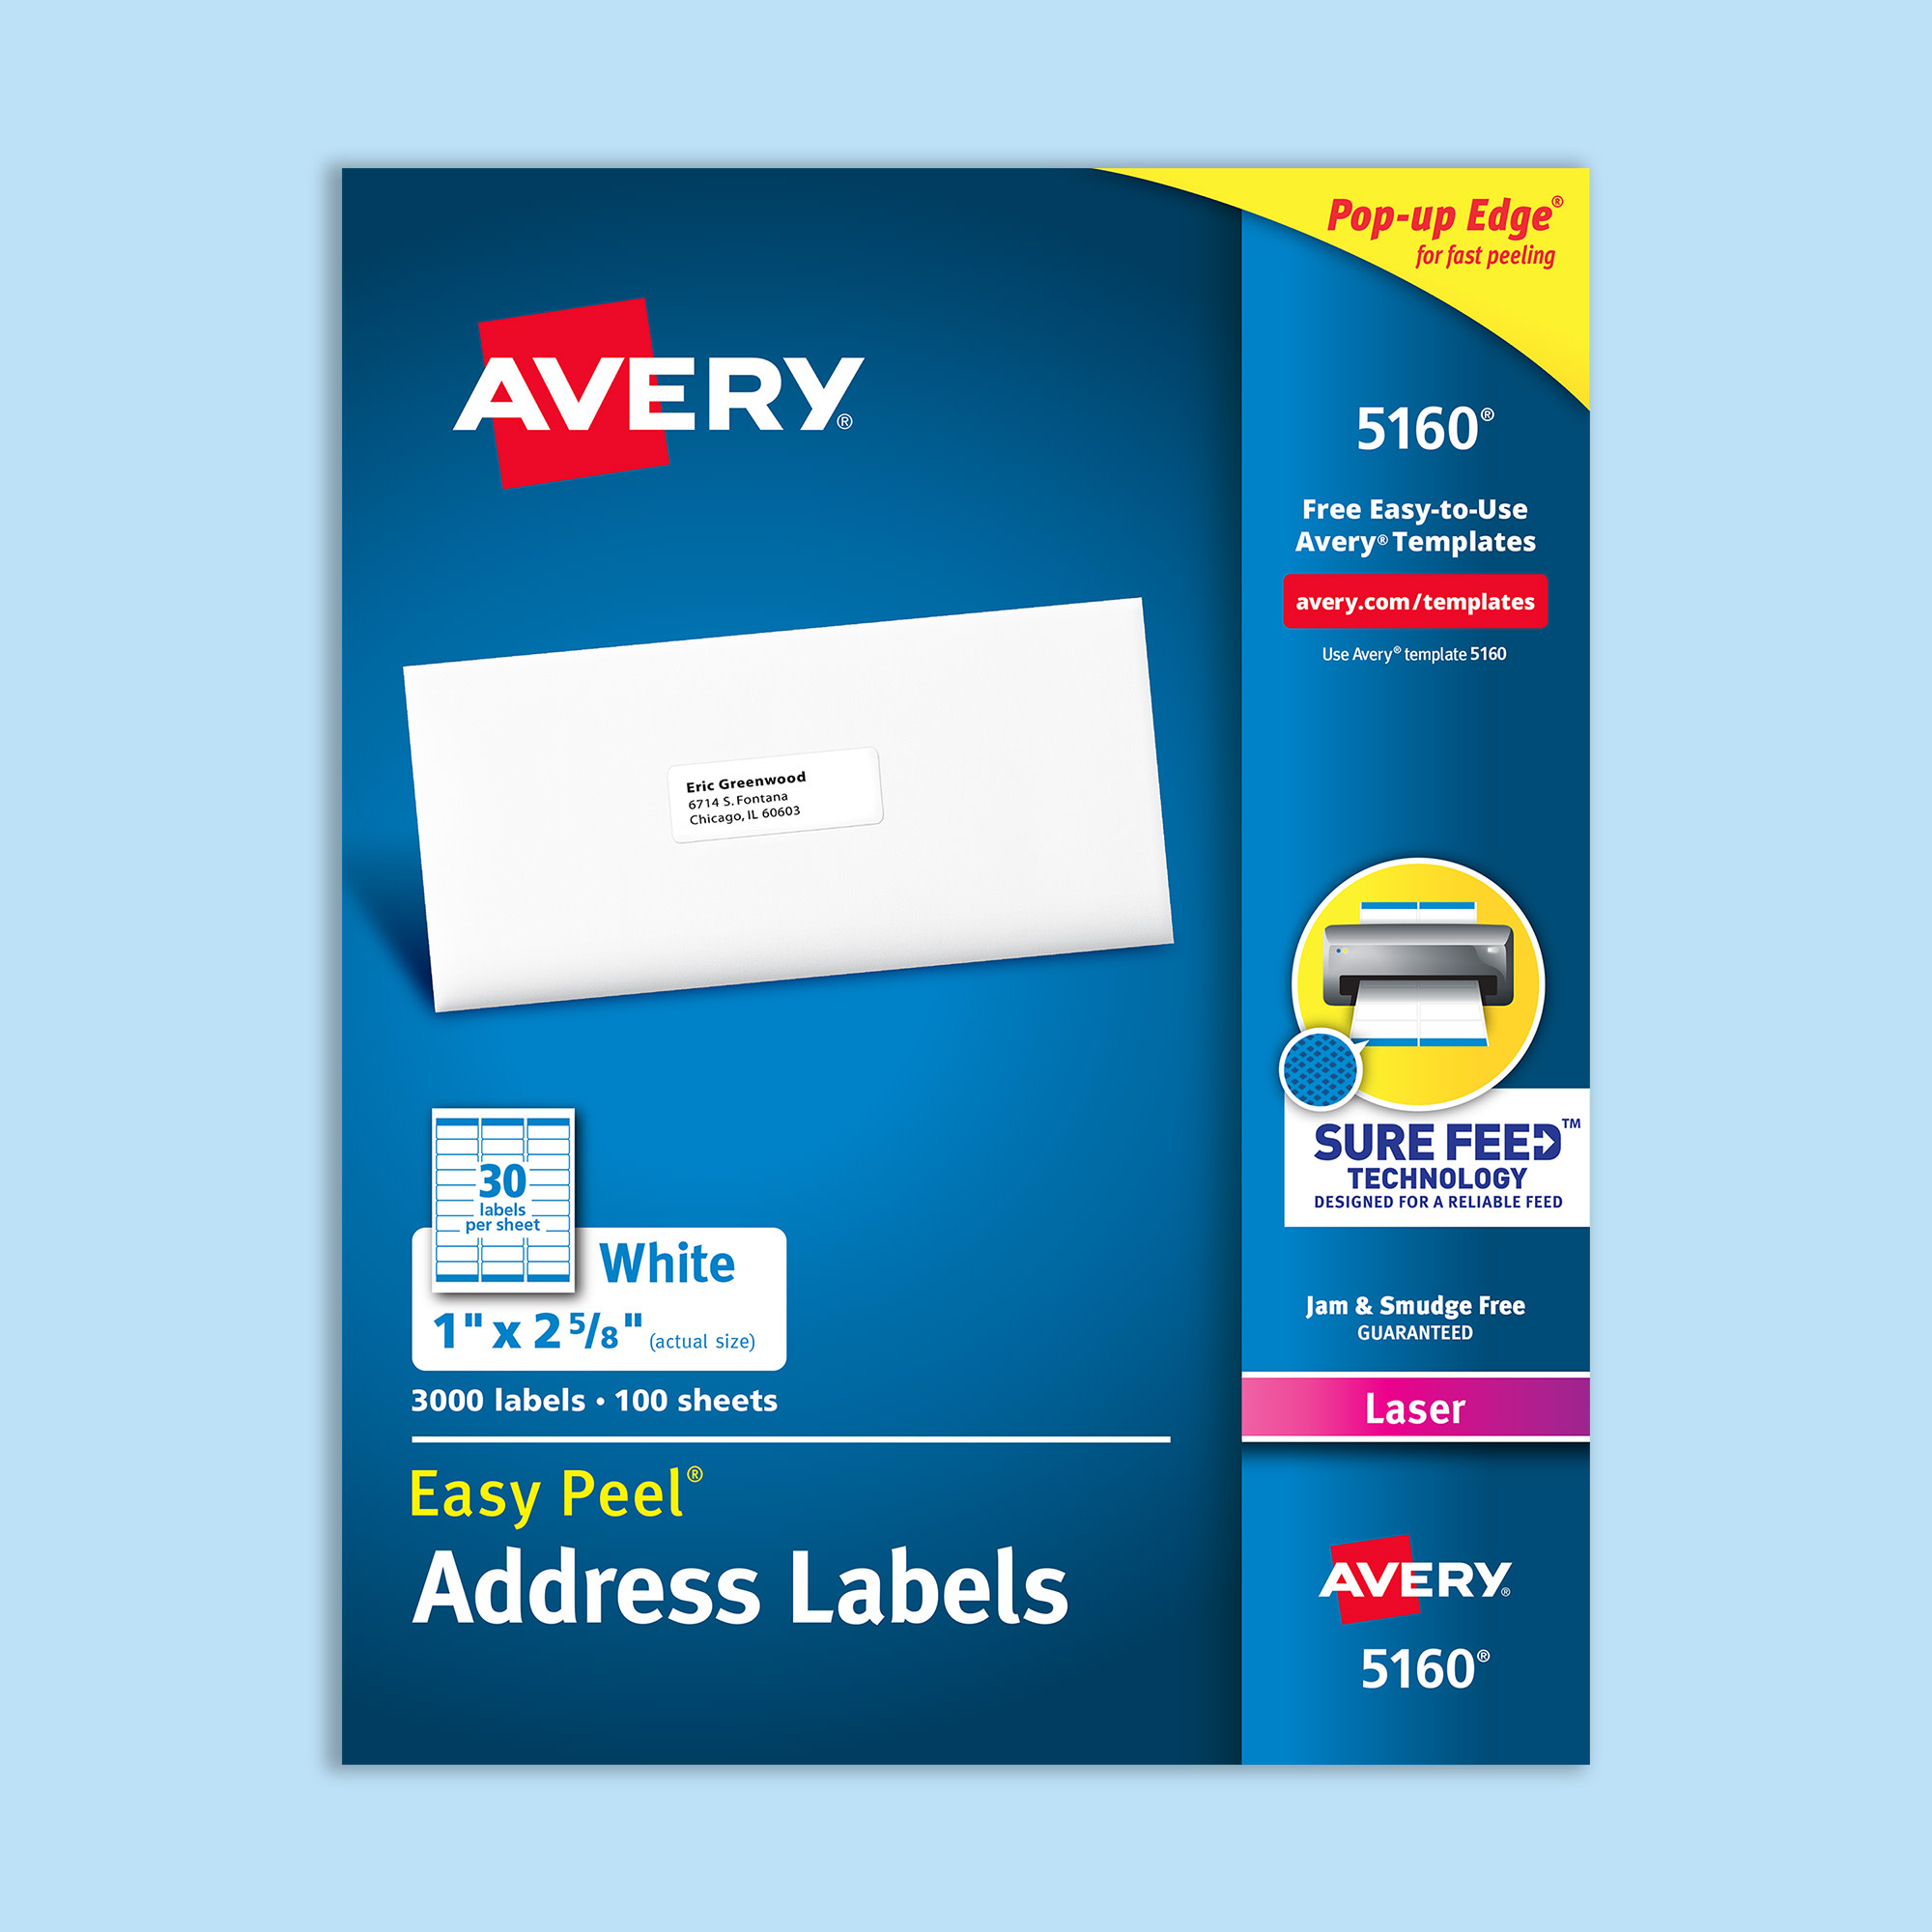 Avery 5160 Template Download